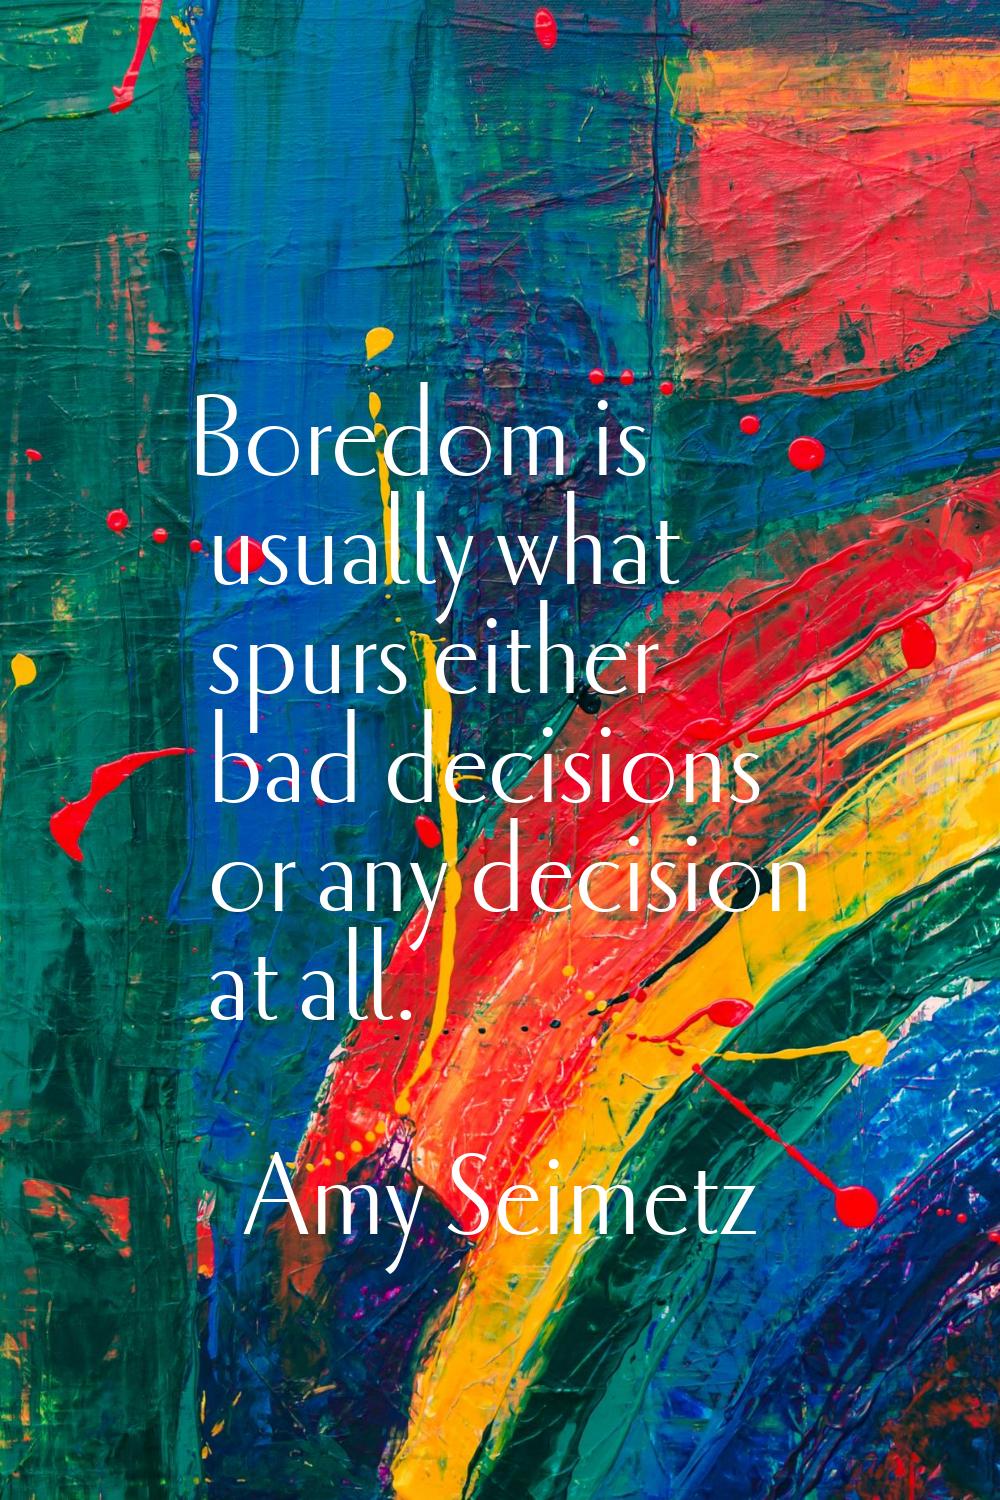 Boredom is usually what spurs either bad decisions or any decision at all.